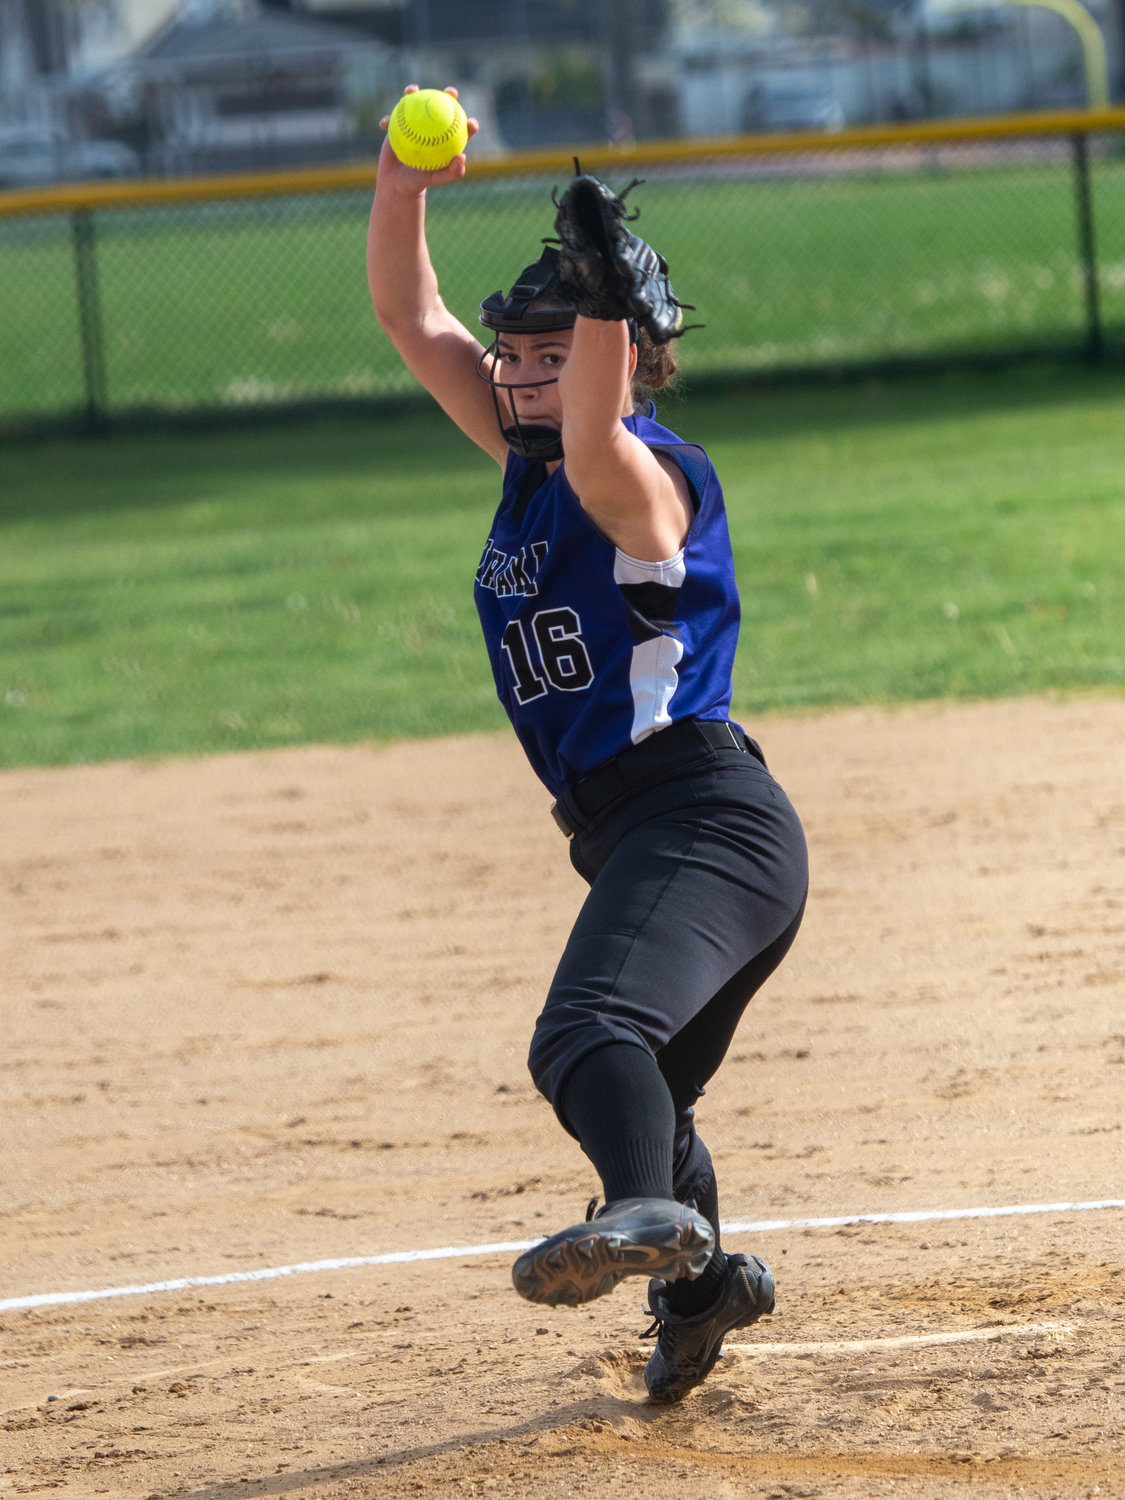 Sophomore pitcher Madison DeMaio has been dominant this spring and tossed a no-hitter May 5 in a 4-0 win over Locust Valley.